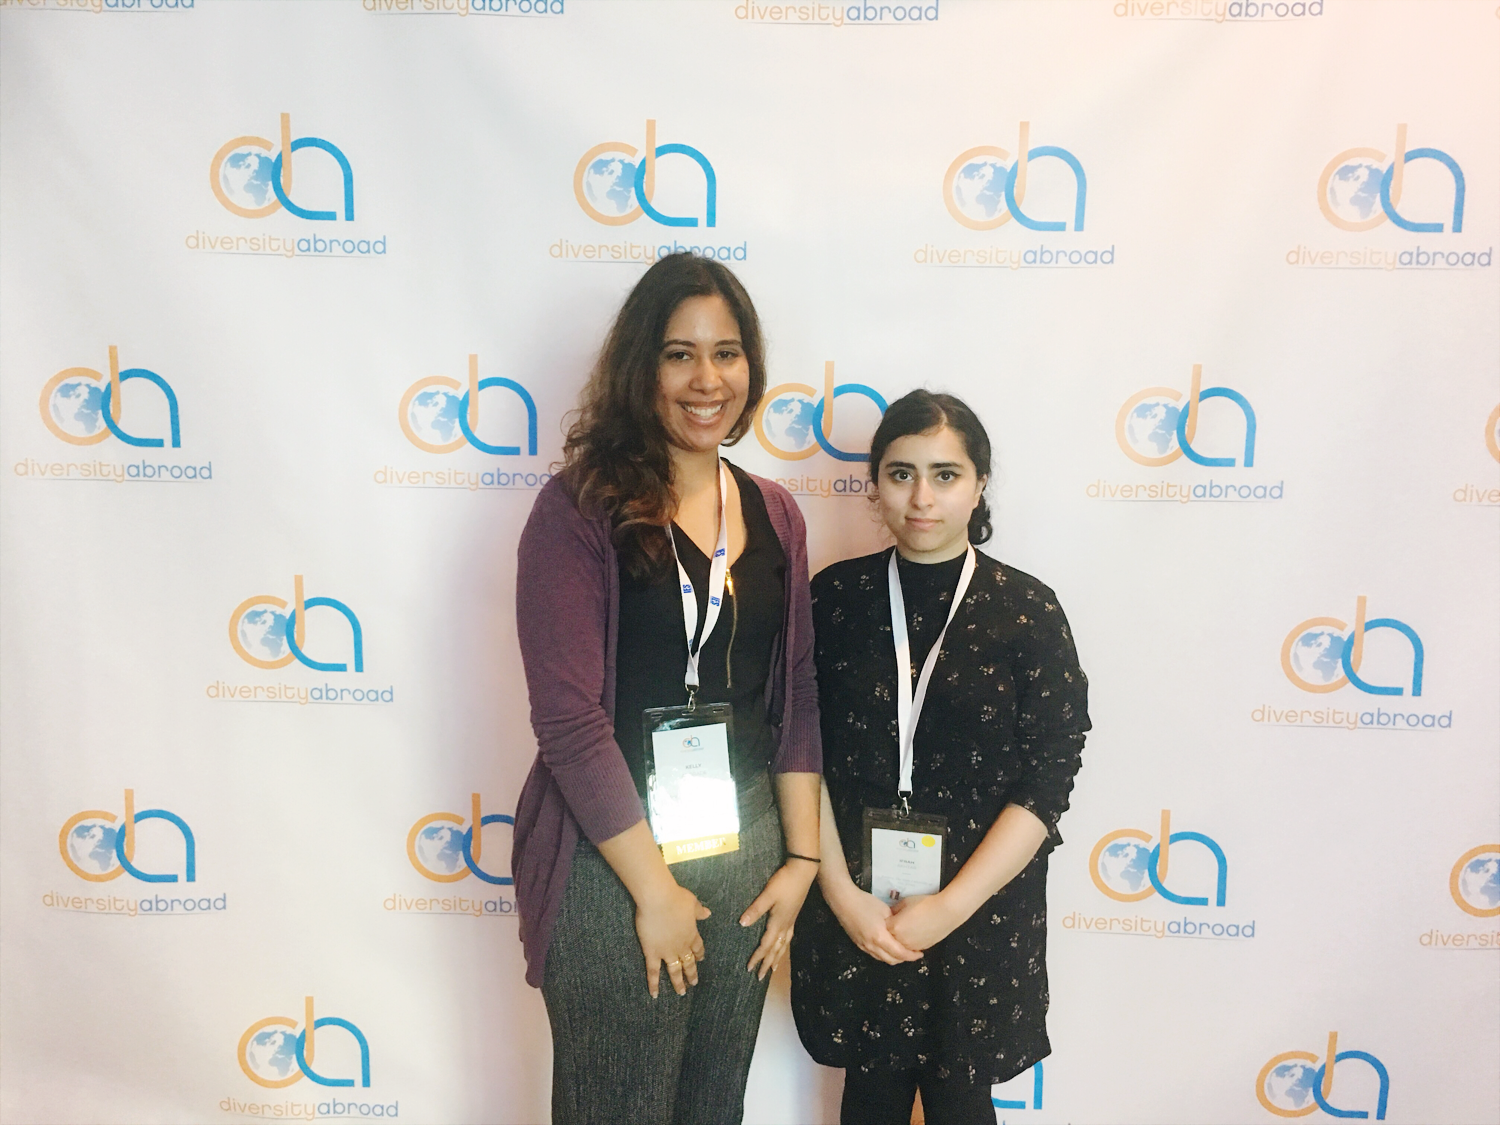 Ifrah and Kelly at the Diversity Abroad Conference